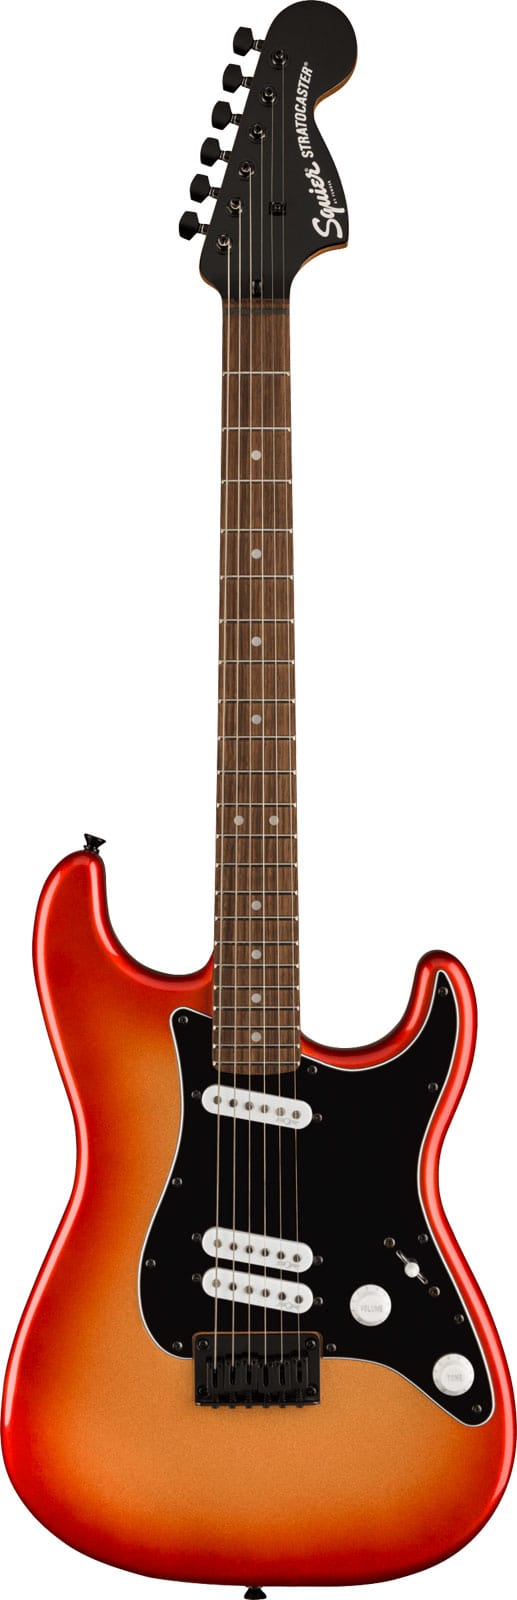 SQUIER STRATOCASTER SPECIAL HT CONTEMPORARY LRL SUNSET METALLIC